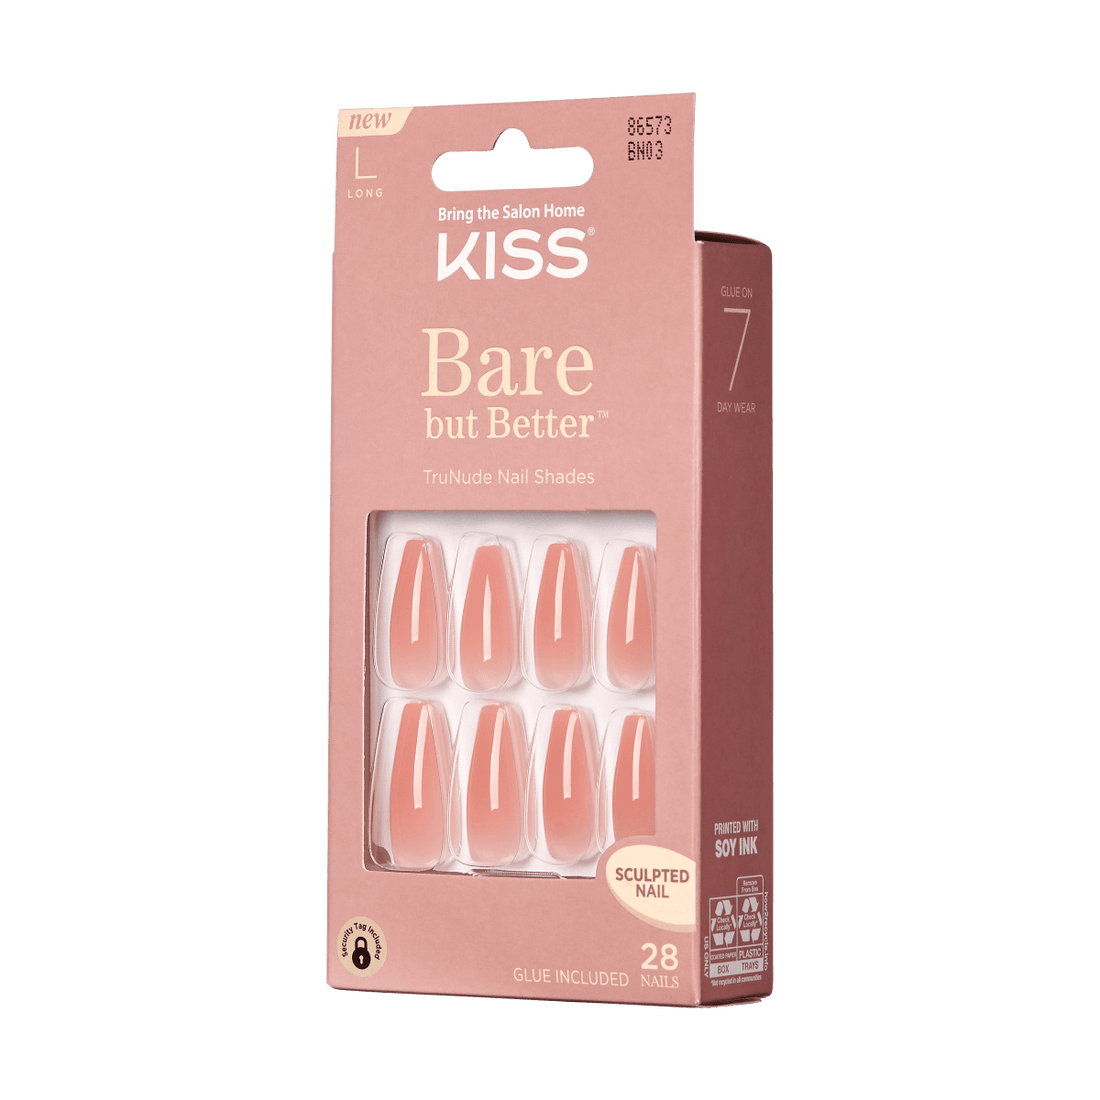 KISS Bare But Better, Press-On Nails, Nude Glow, Nude, Long Coffin, 28ct